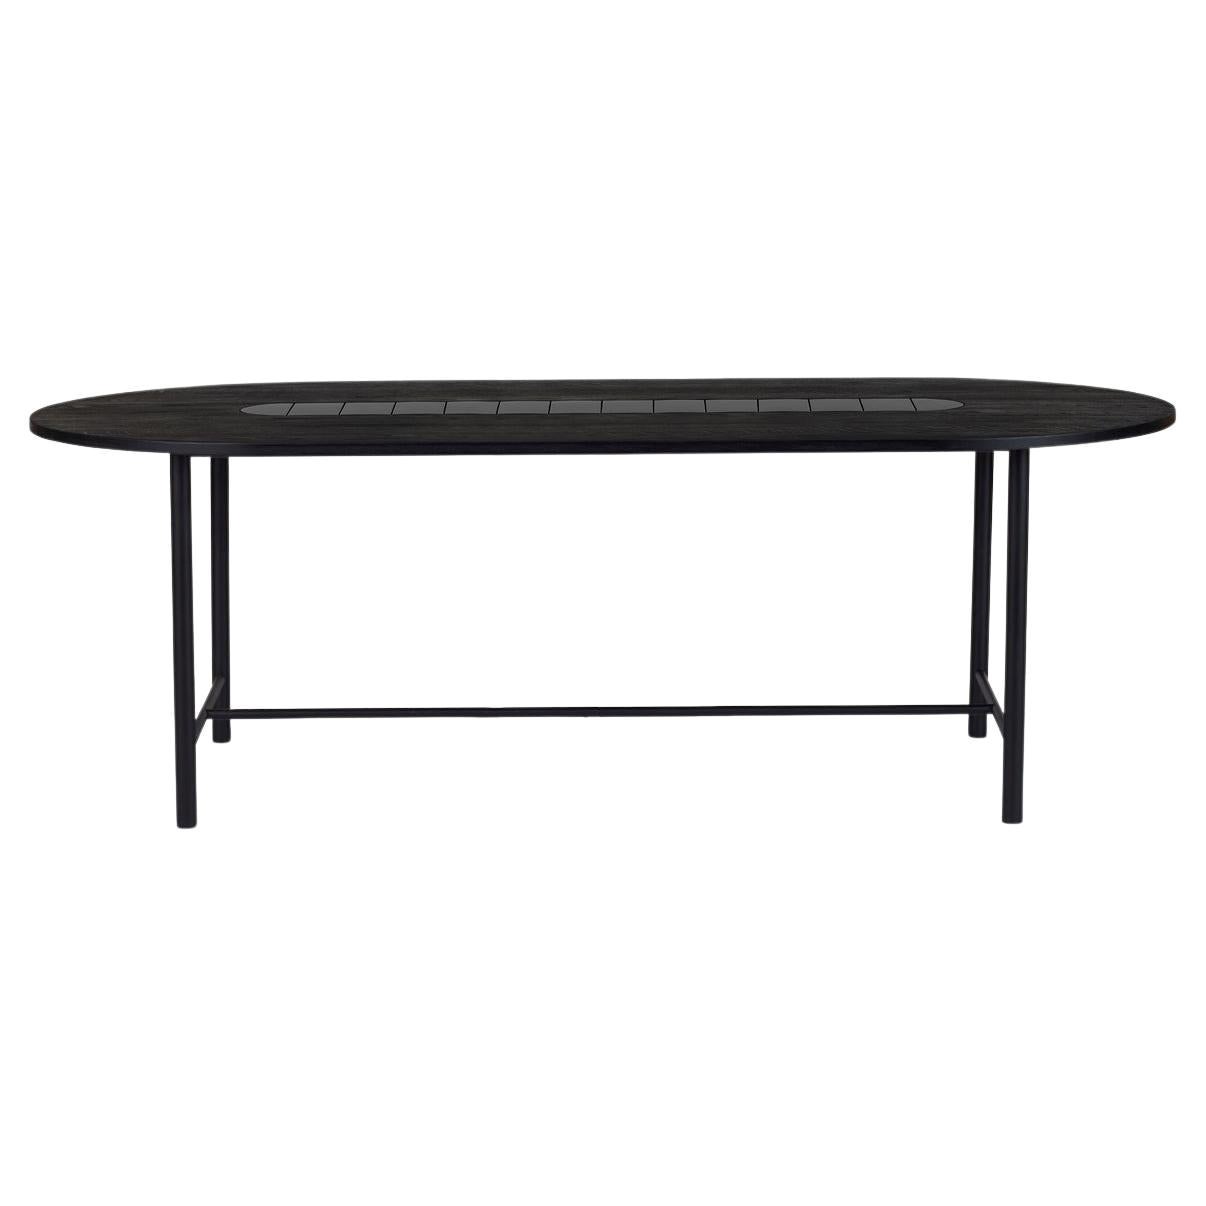 Be My Guest Dining Table 240 Black Oak Soft Black Tiles by Warm Nordic